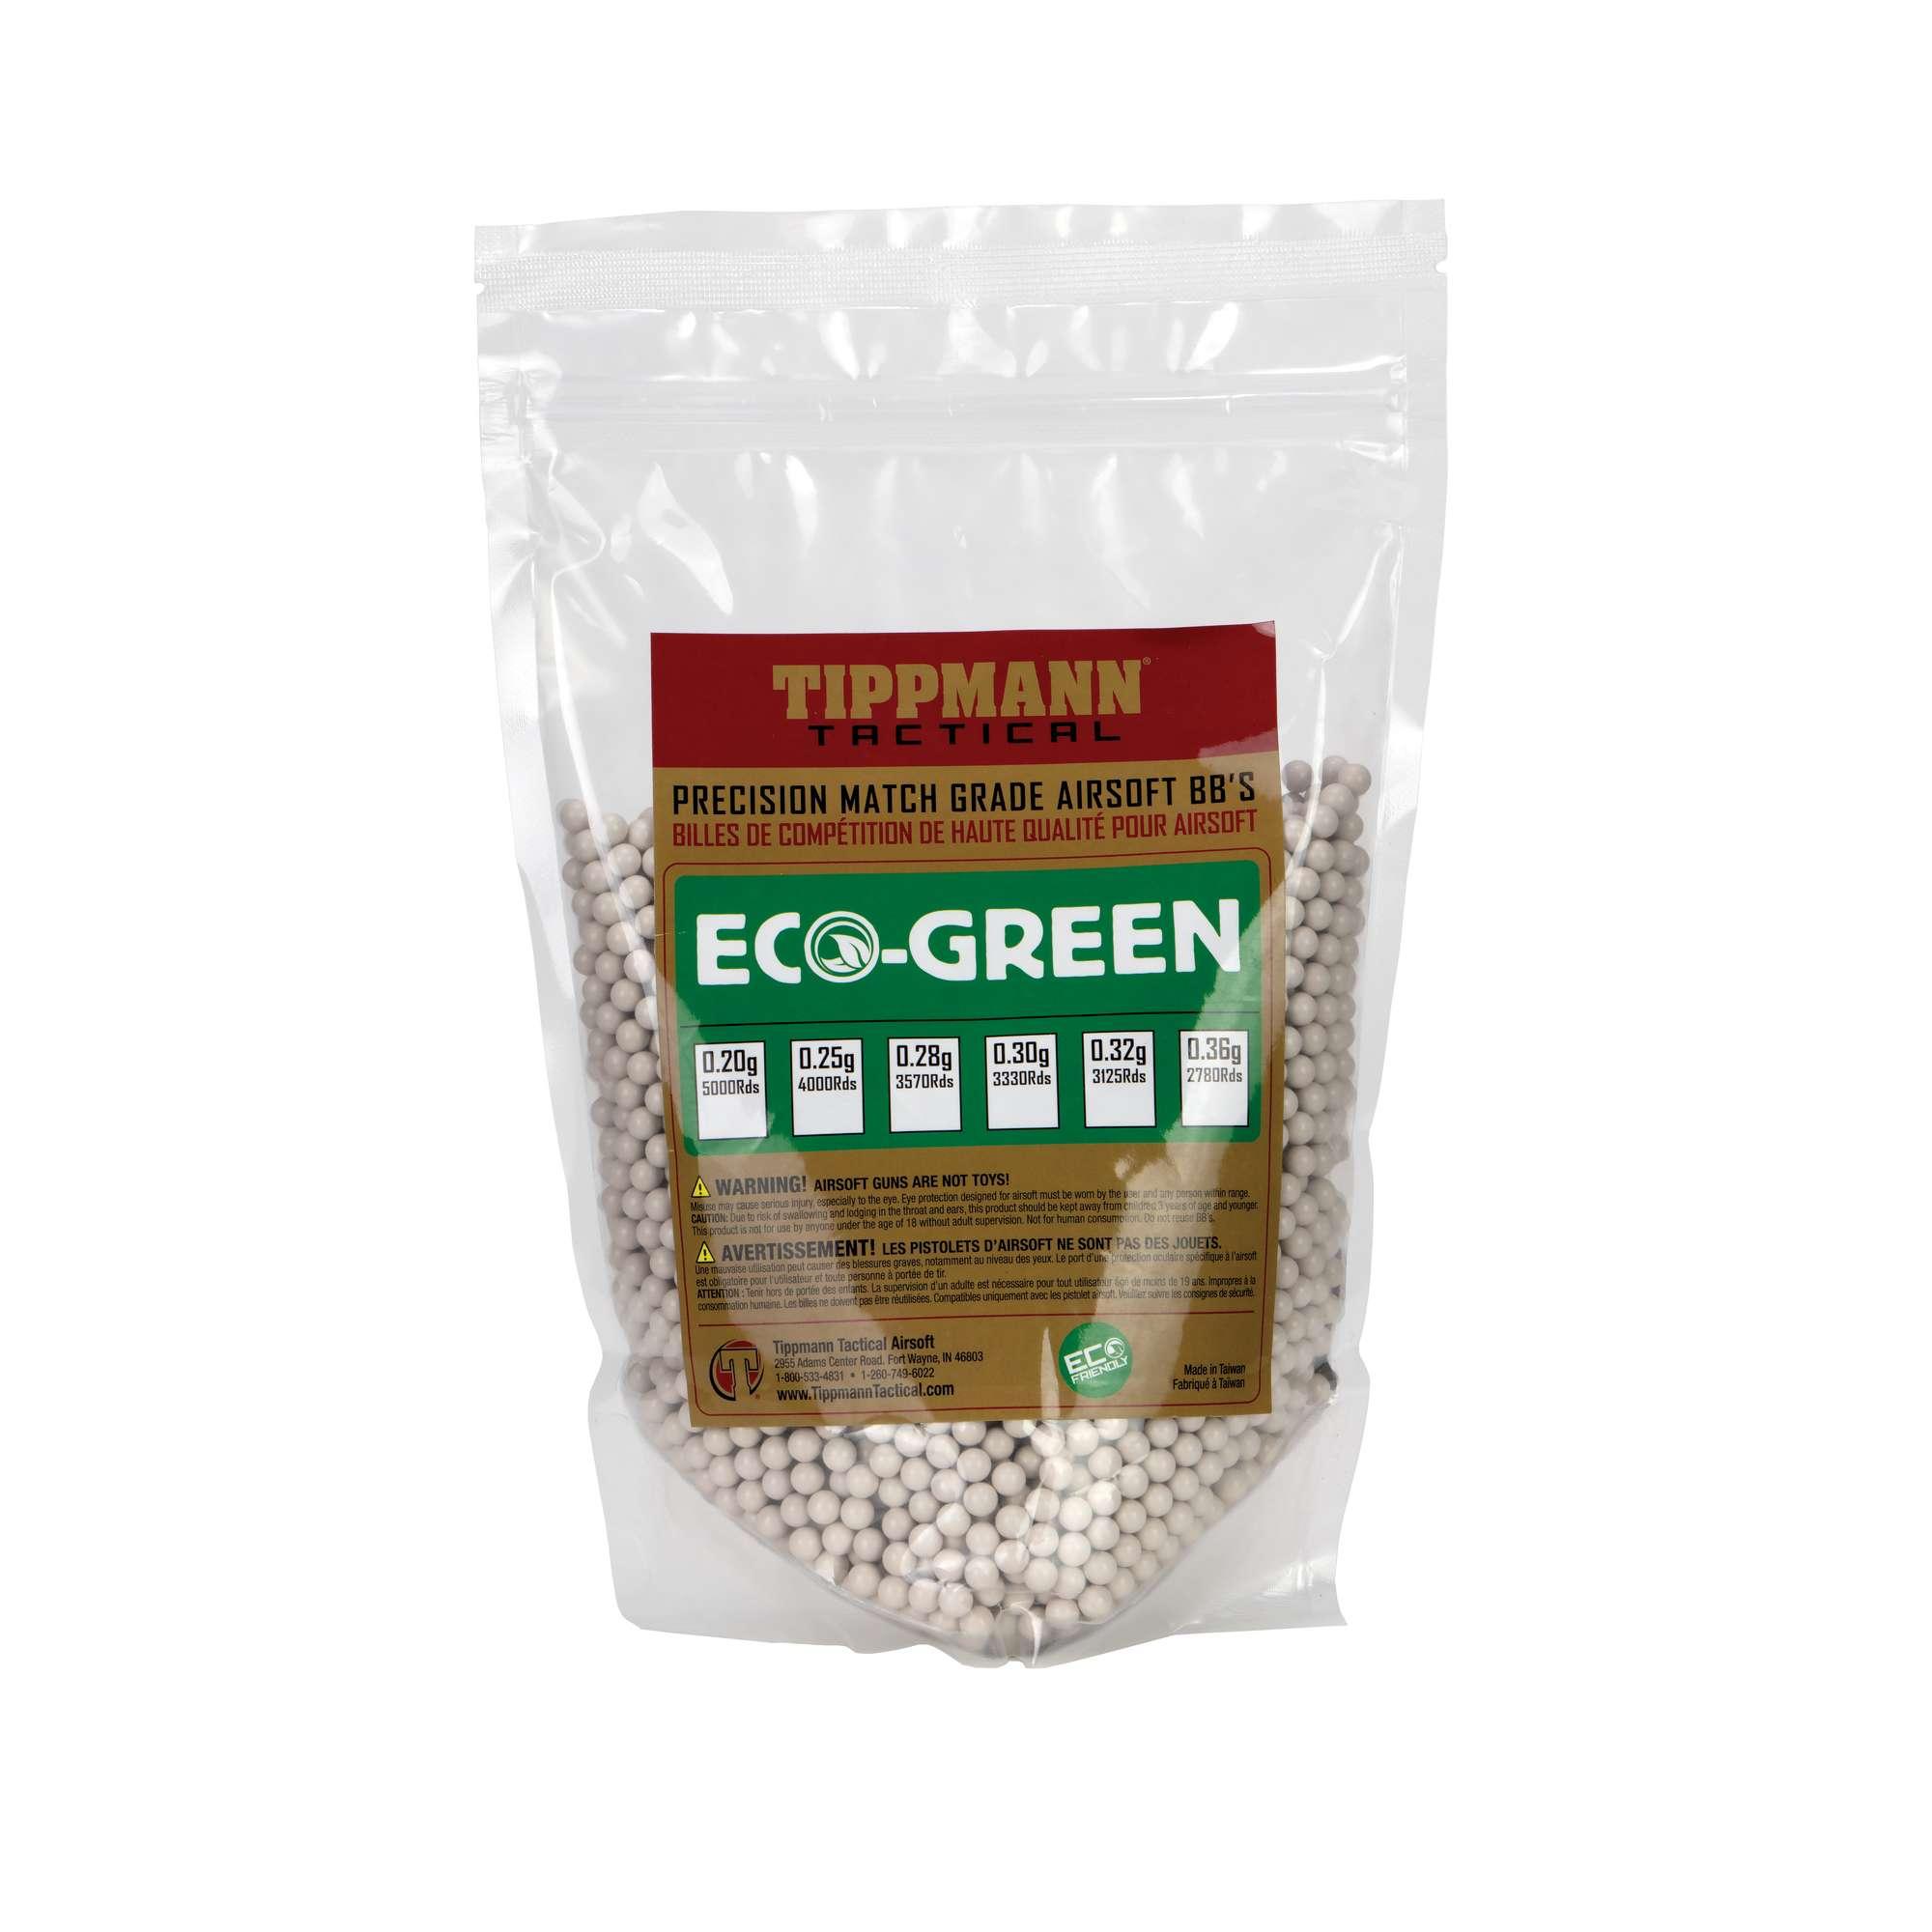 Tippmann Tactical Eco Airsoft Ammo 28g 3,570ct, 6mm